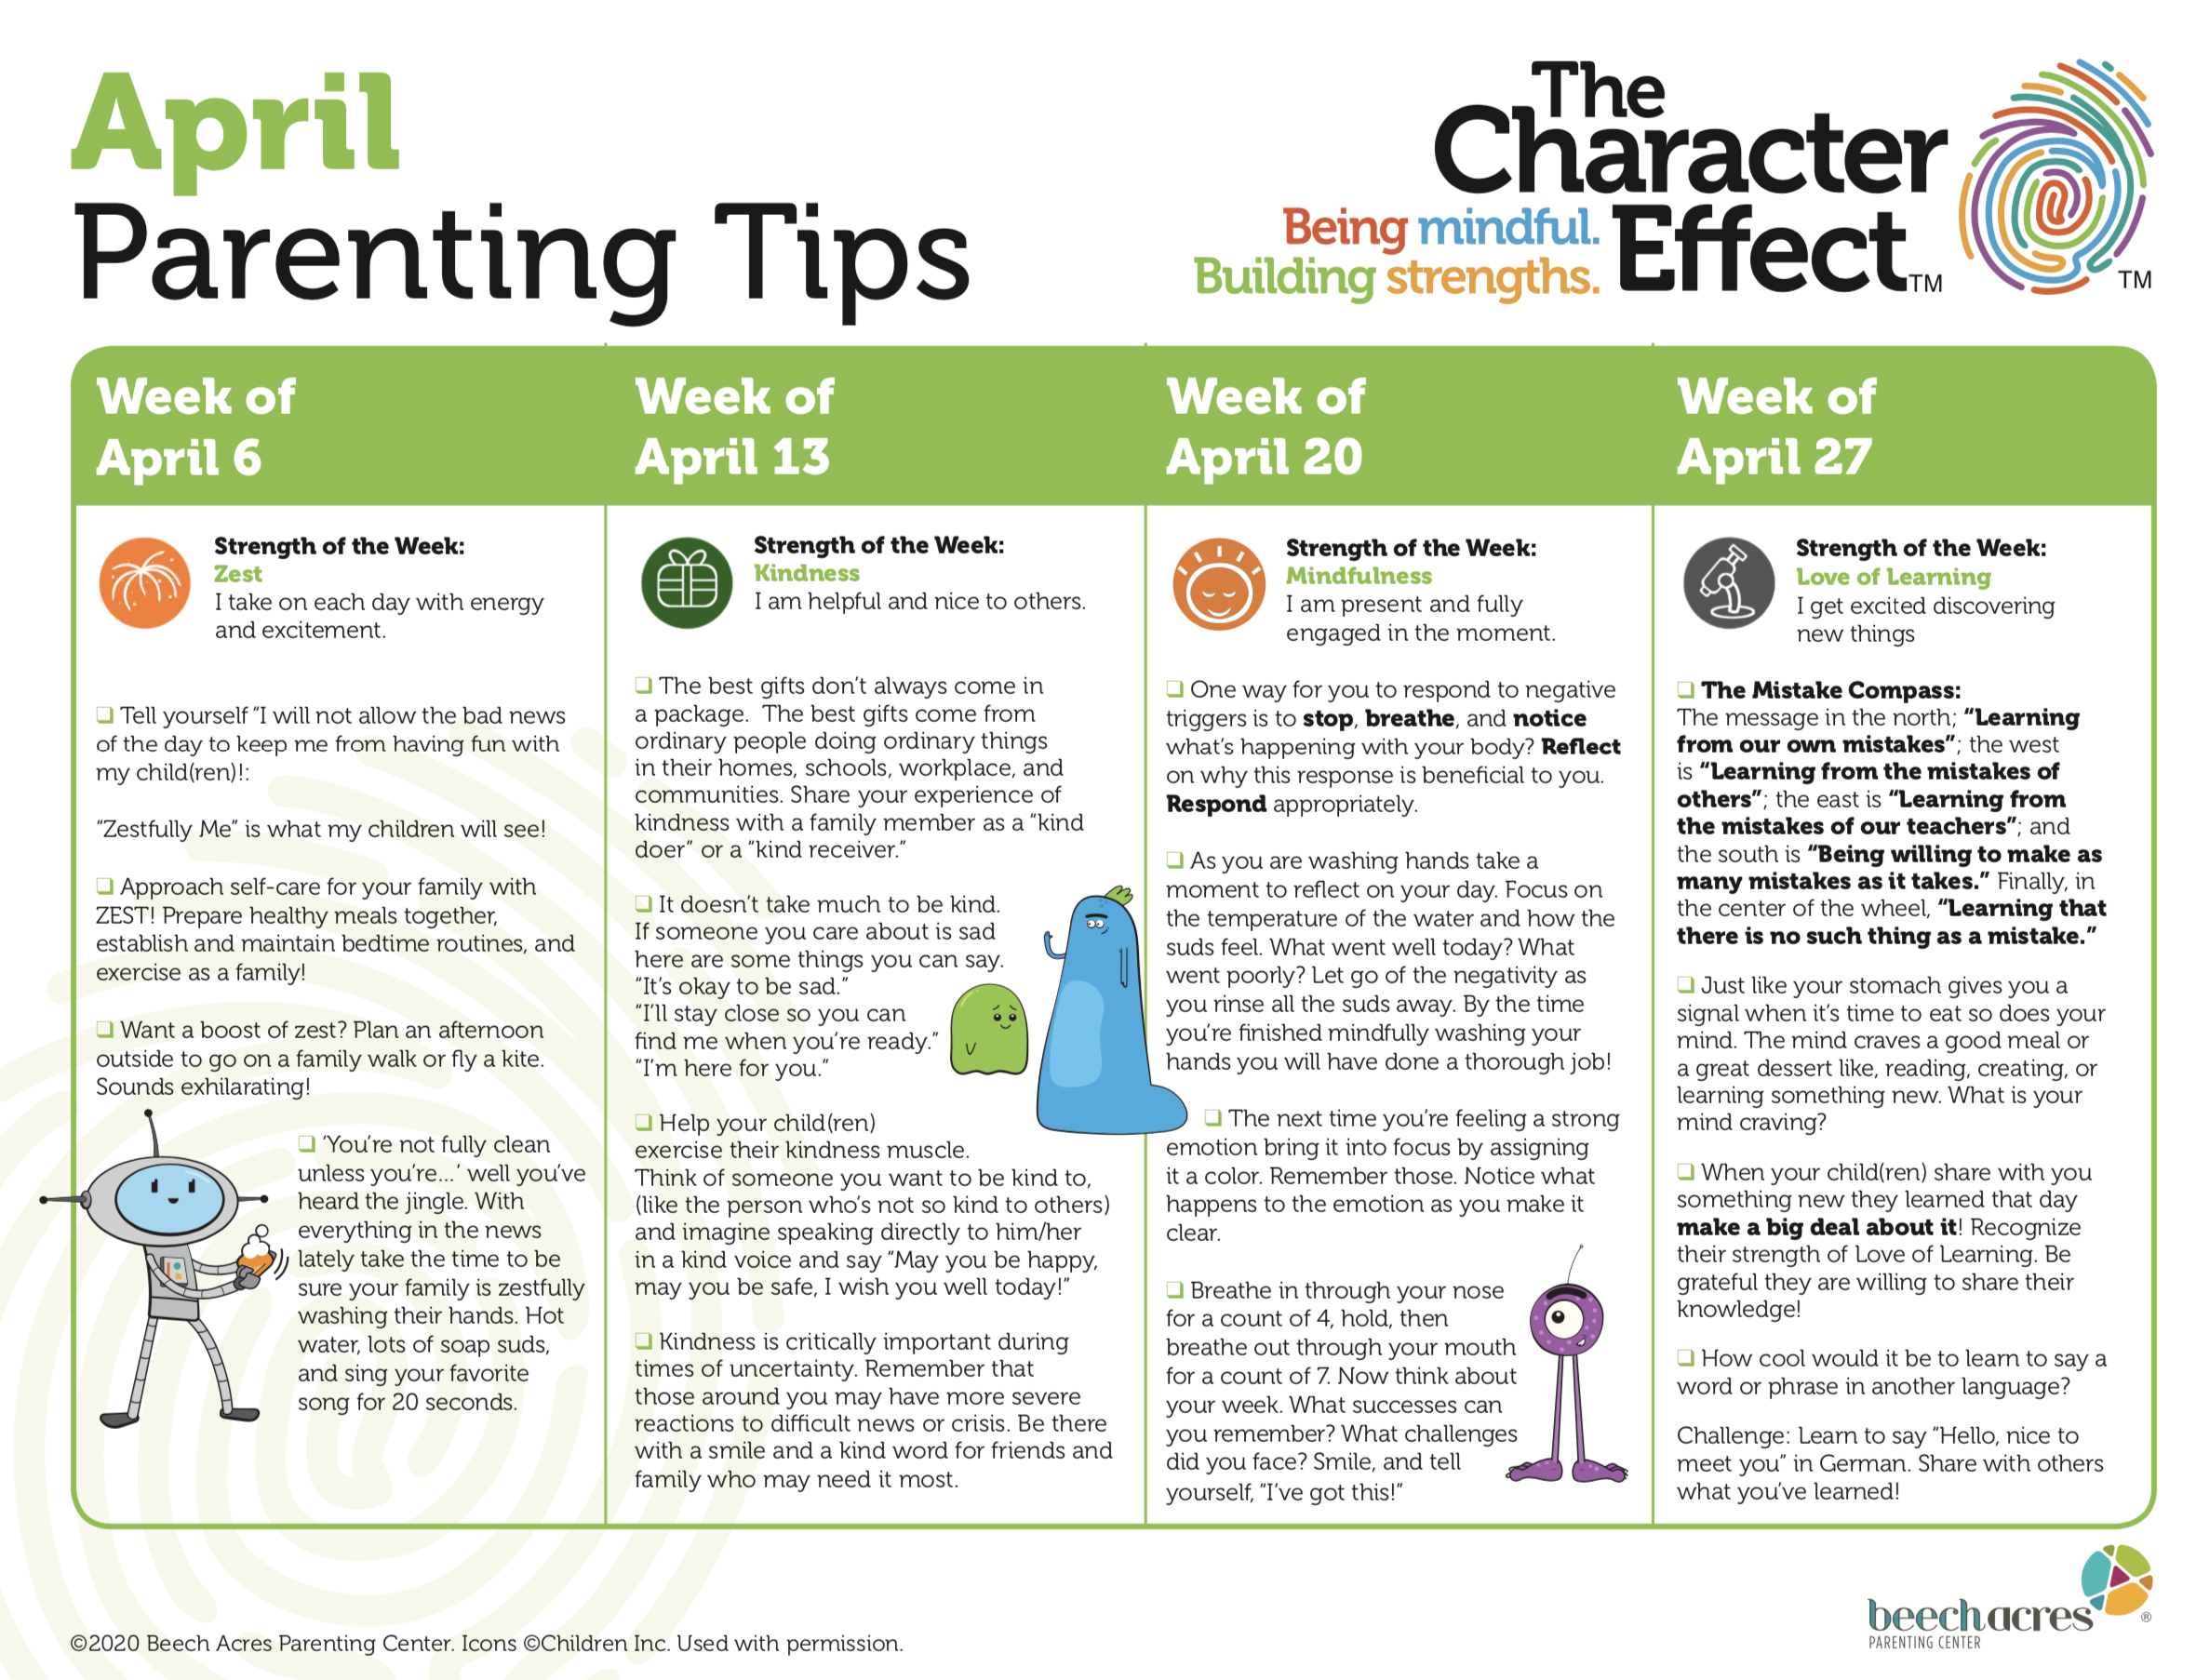 April Parenting Tips From The Character Effect, Now With Even More CHARACTER!